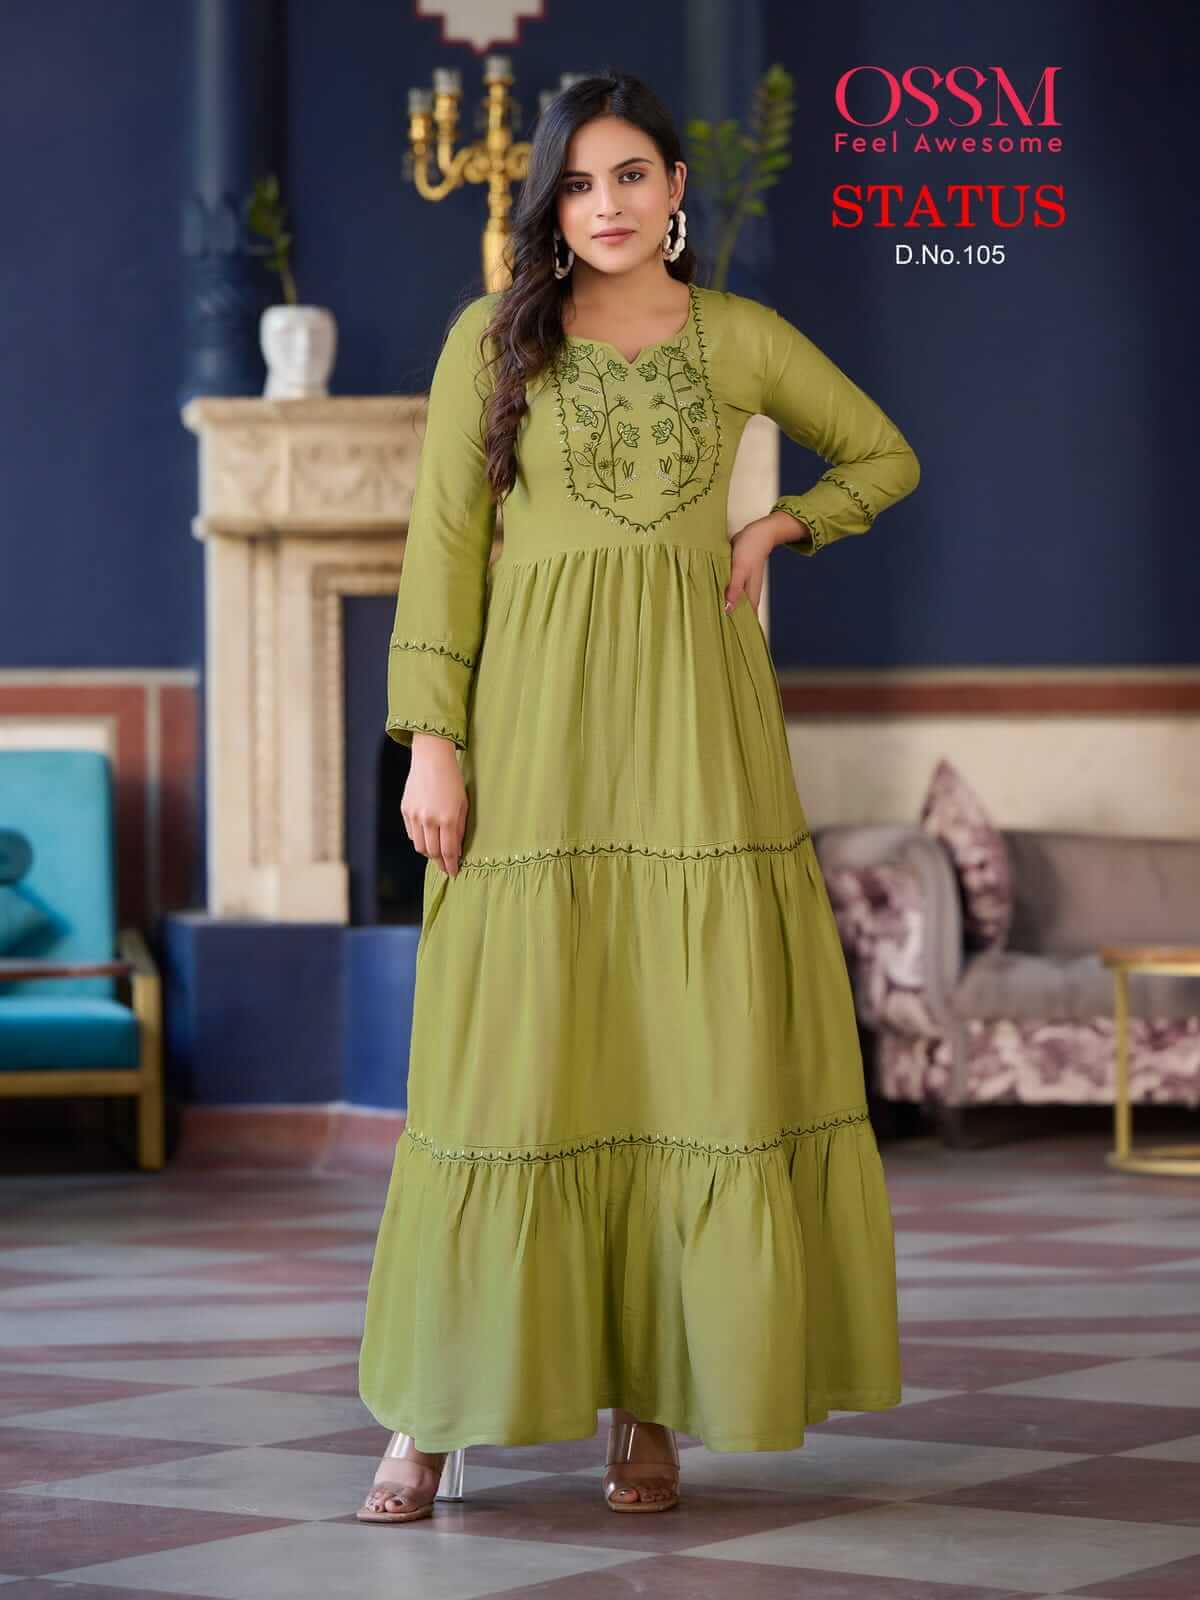 Ossm Status Gowns Catalog collection 2